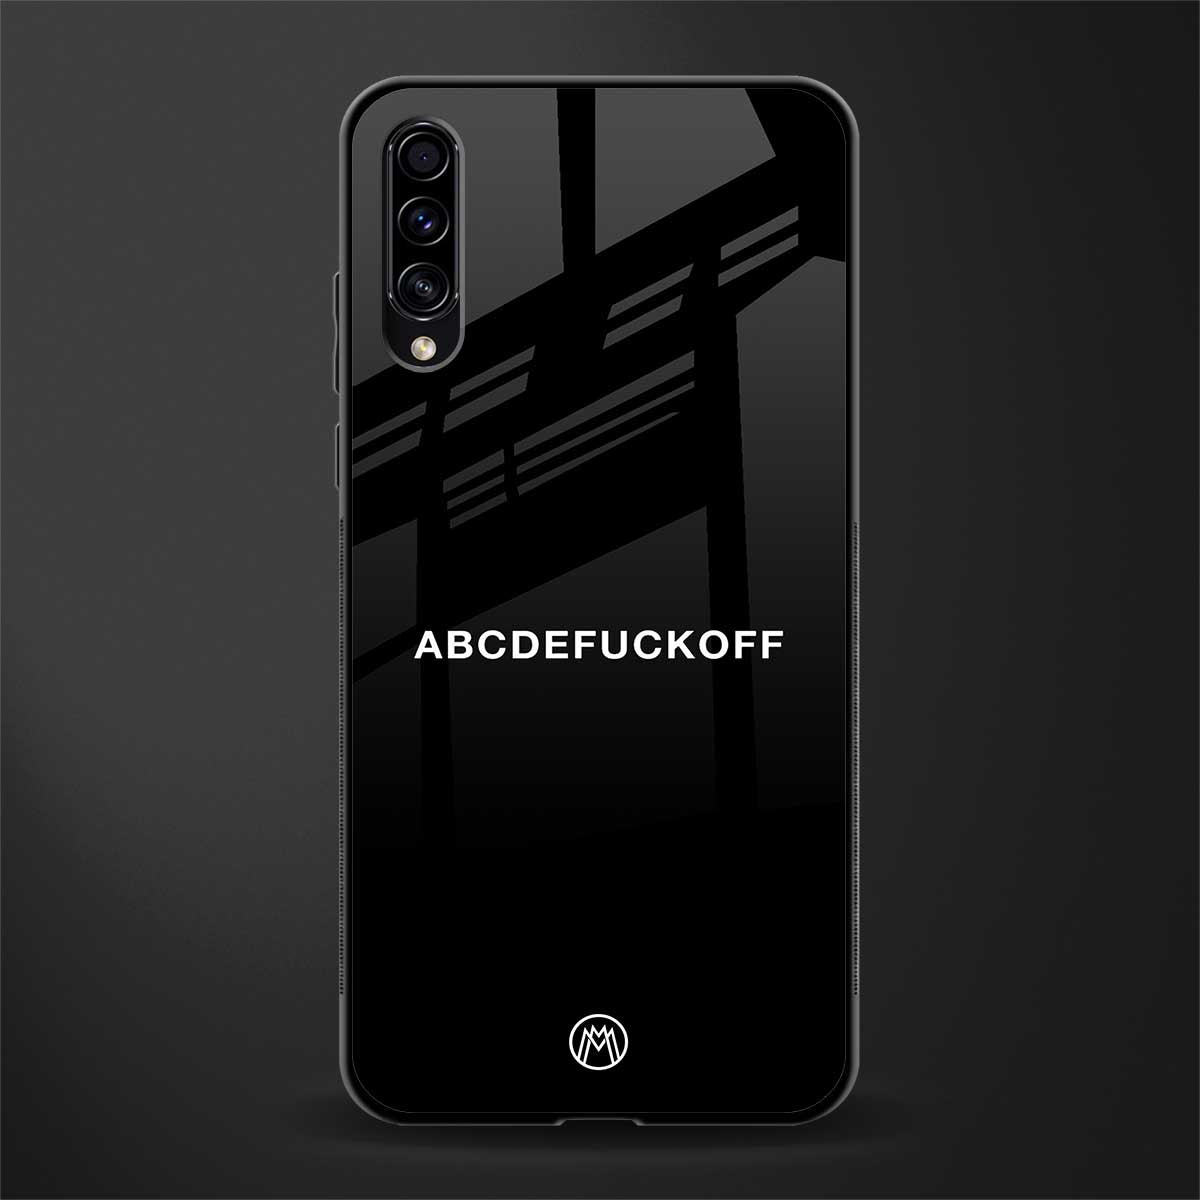 abcdefuckoff glass case for samsung galaxy a50 image